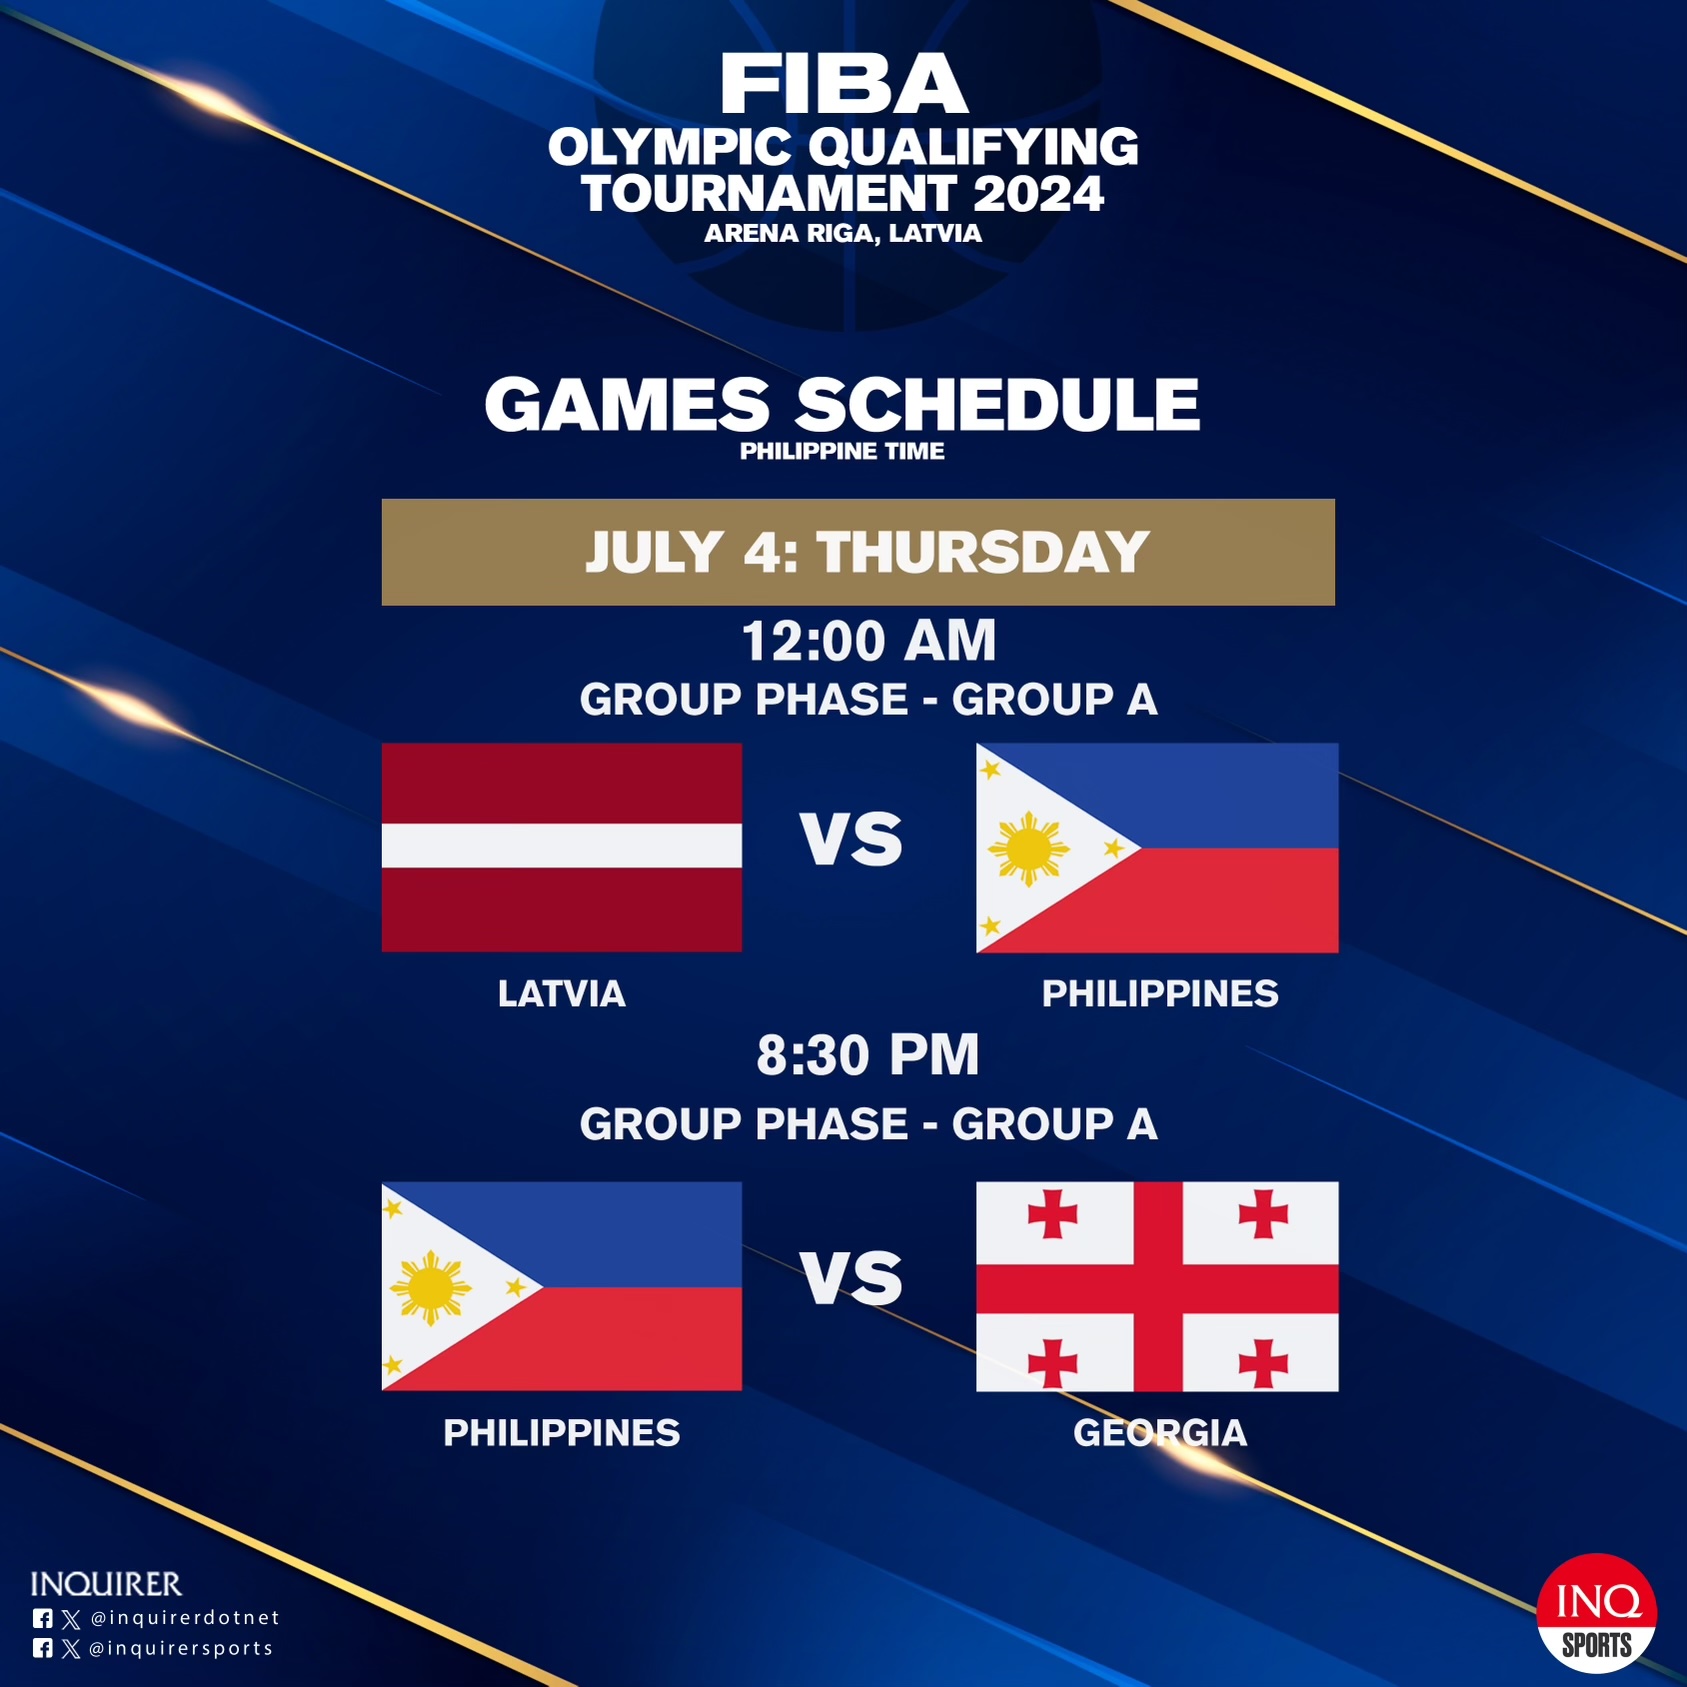 Gilas Pilipinas group stage schedule at Fiba OQT (Philippine time)